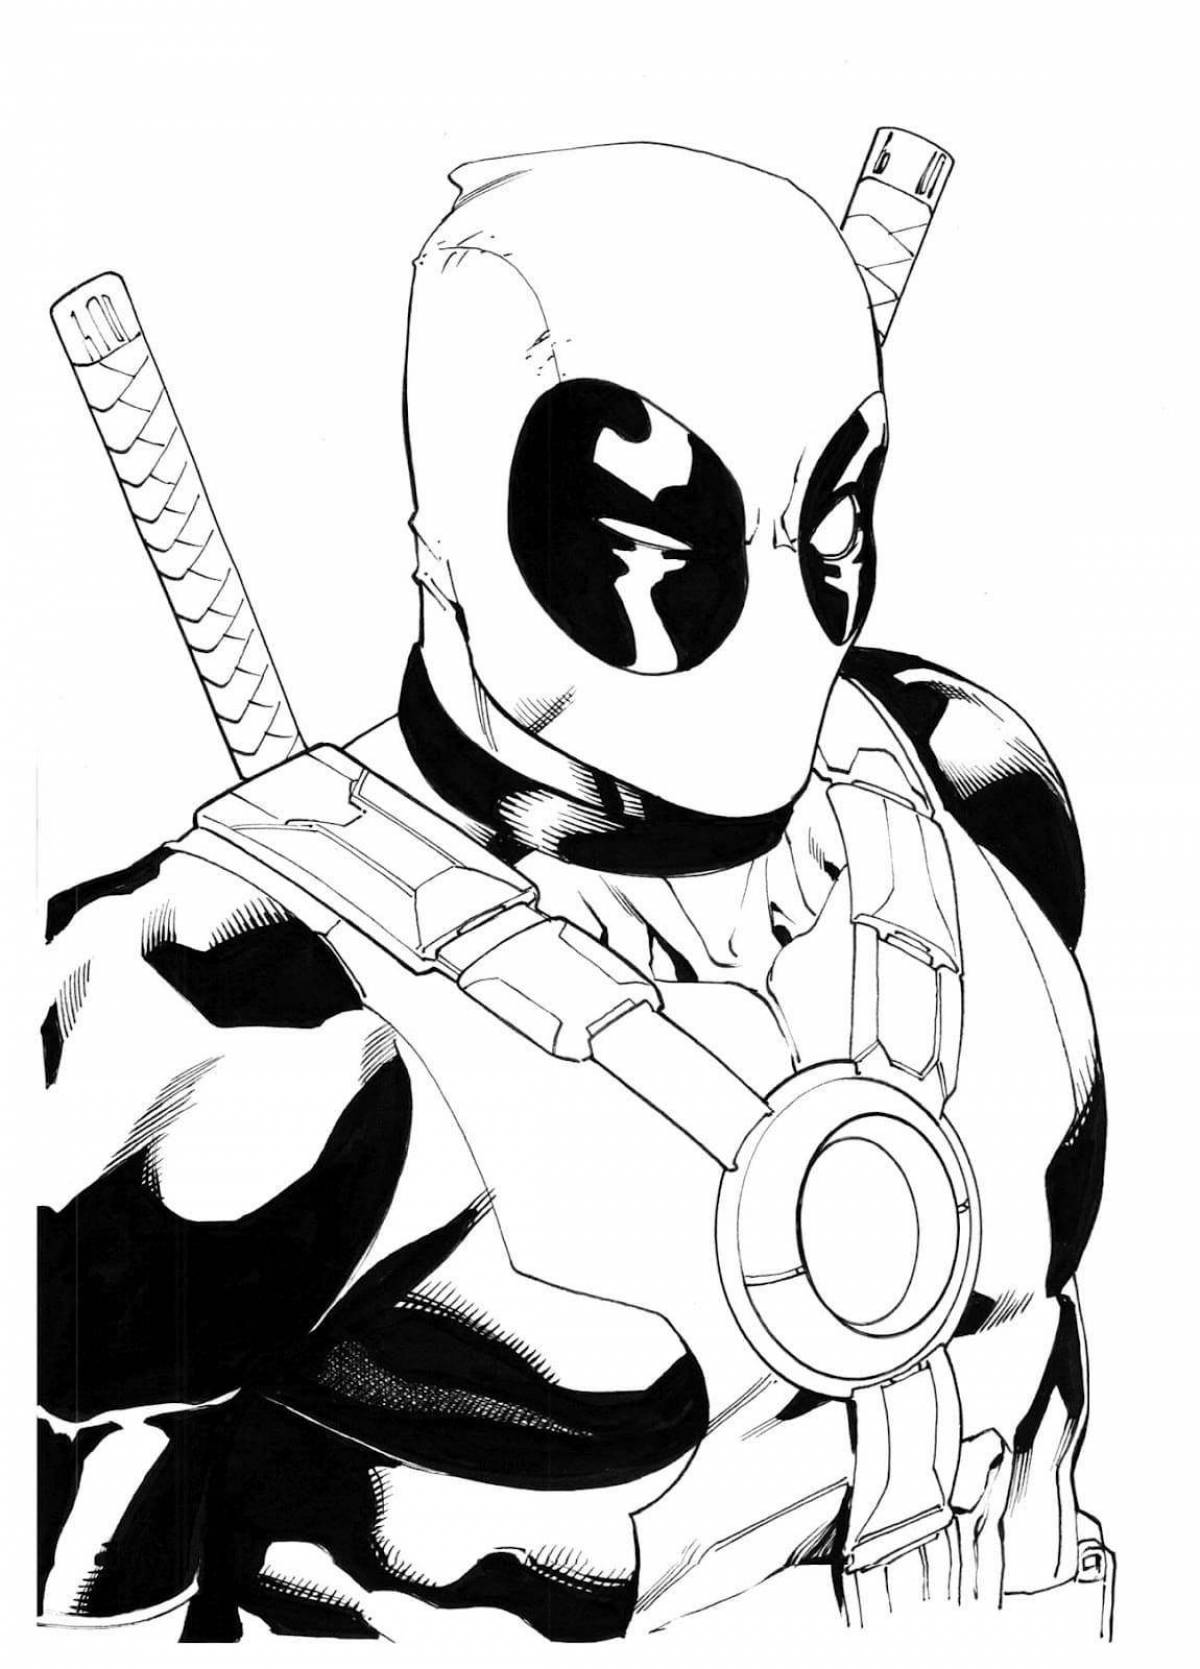 Deadpool's intriguing coloring book